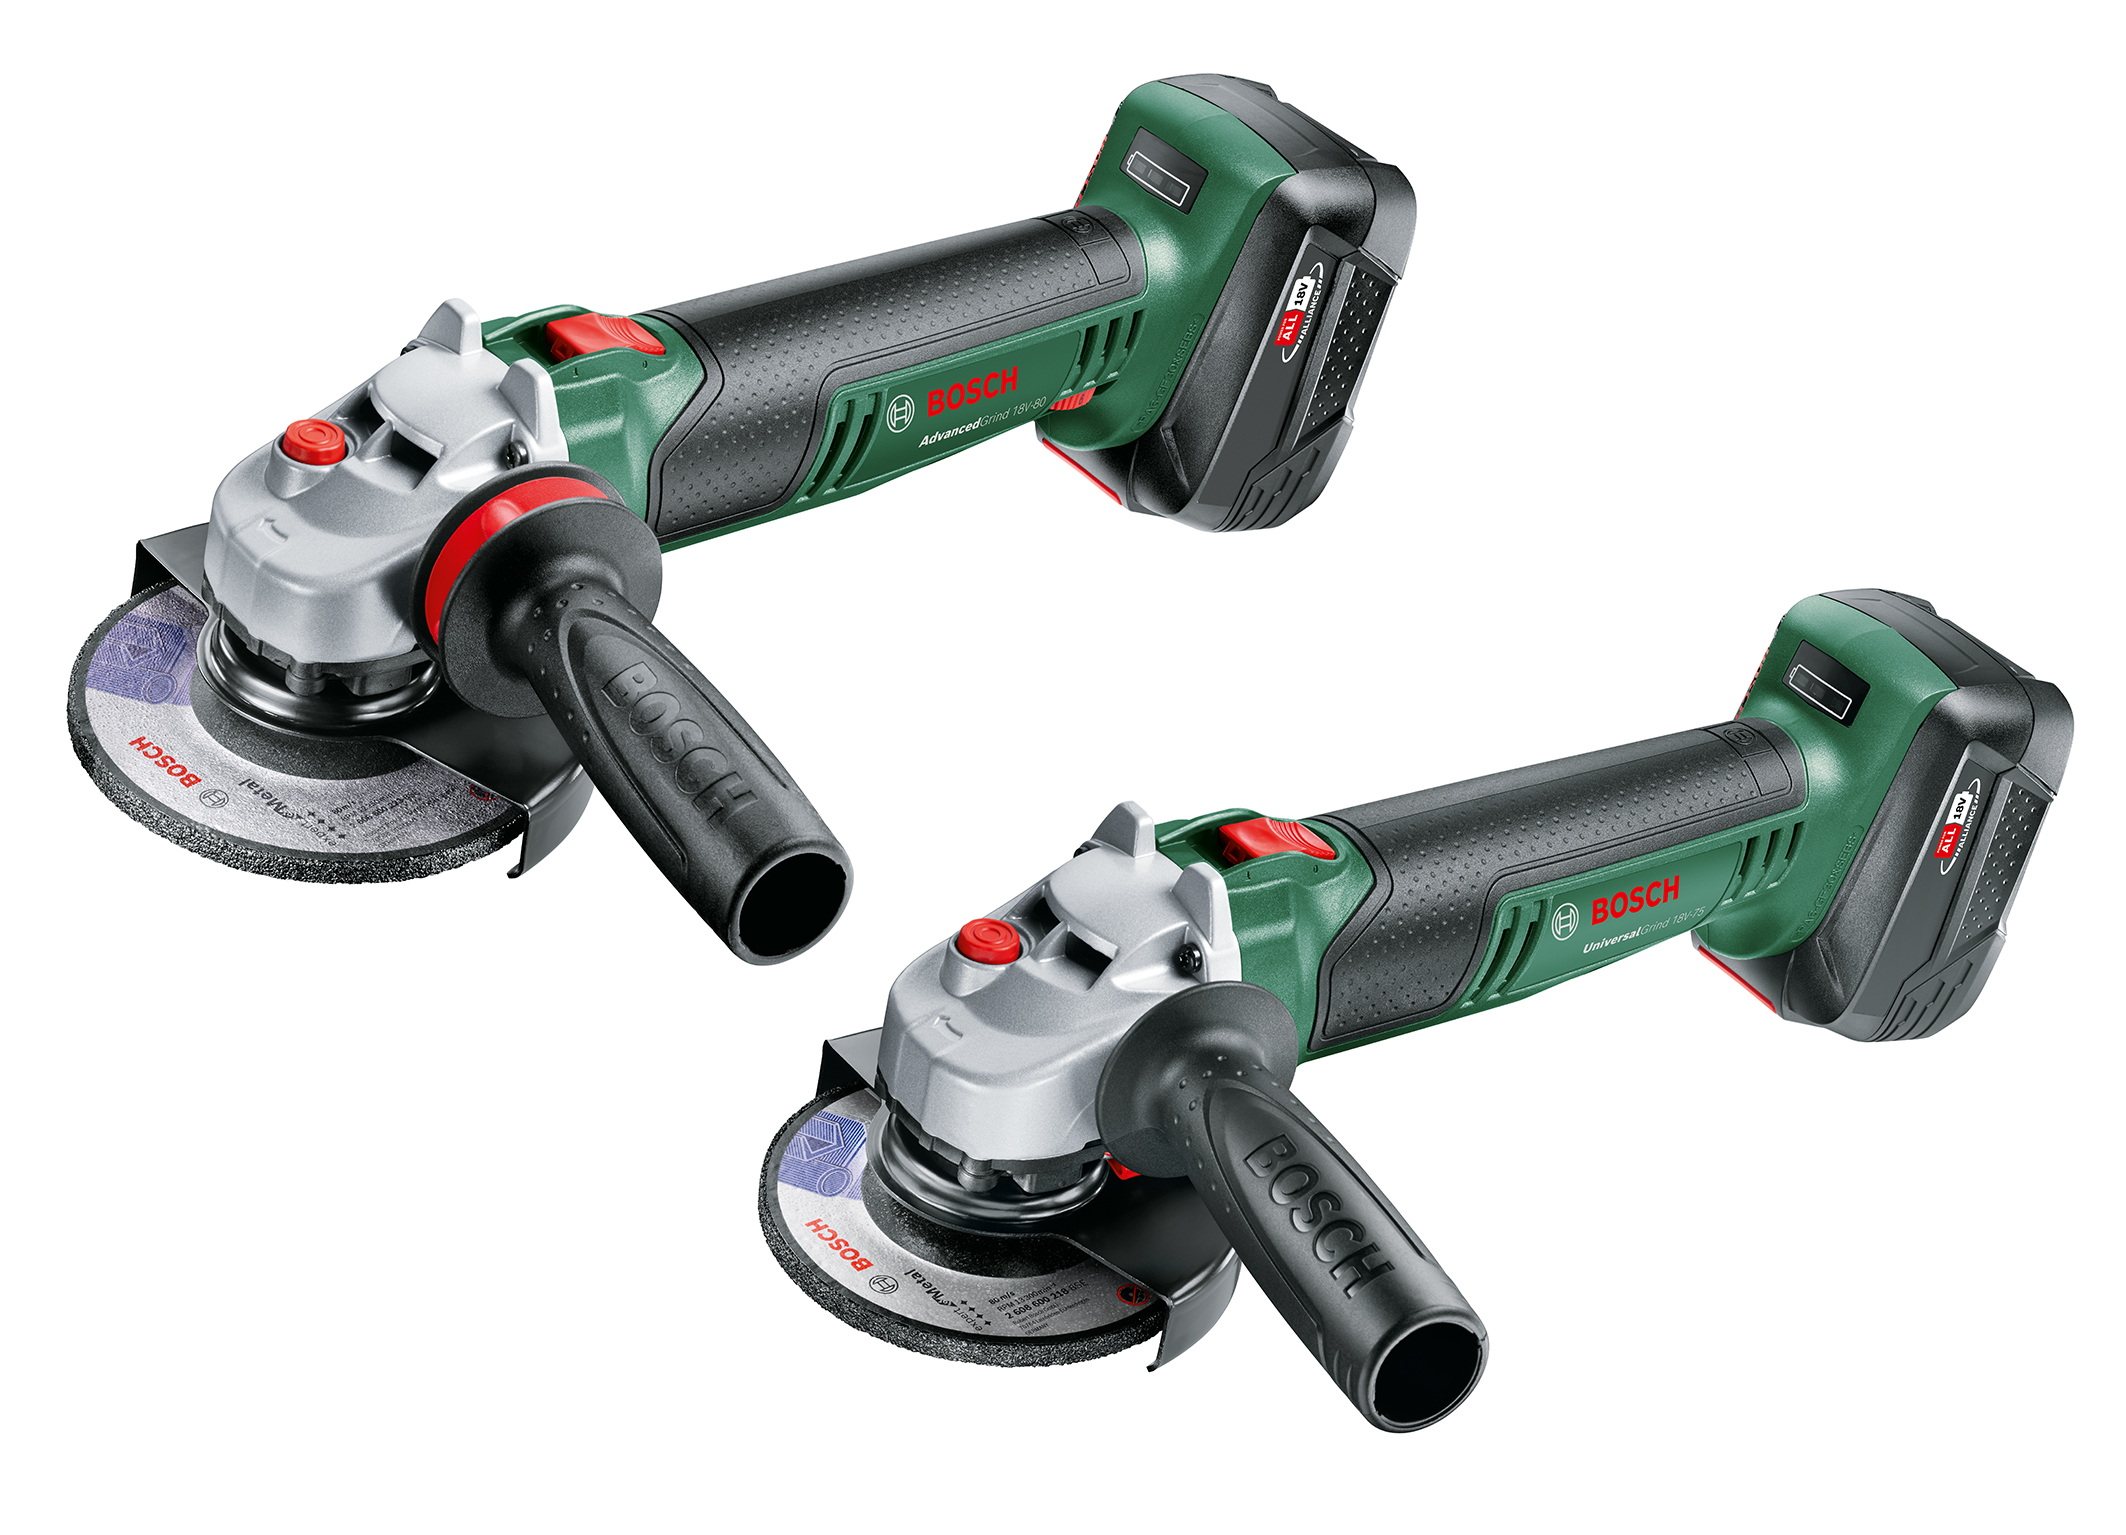 Extension of the ‘18V Power for All System’: New cordless angle grinders from Bosch for DIYers